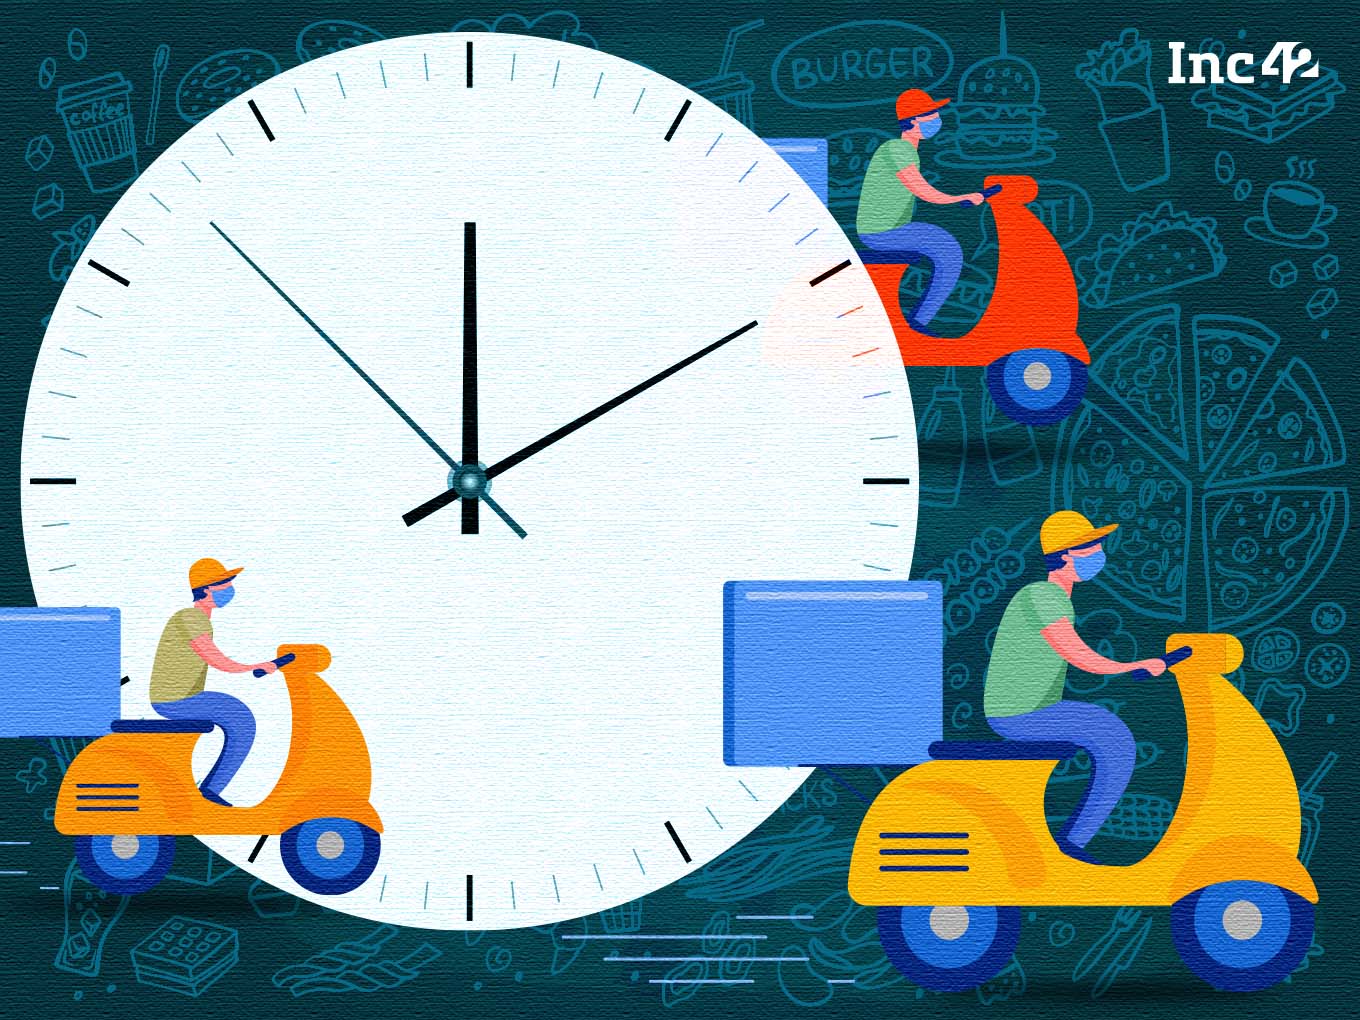 The Impatience Of Zomato Instant & 10-Minute Food Delivery